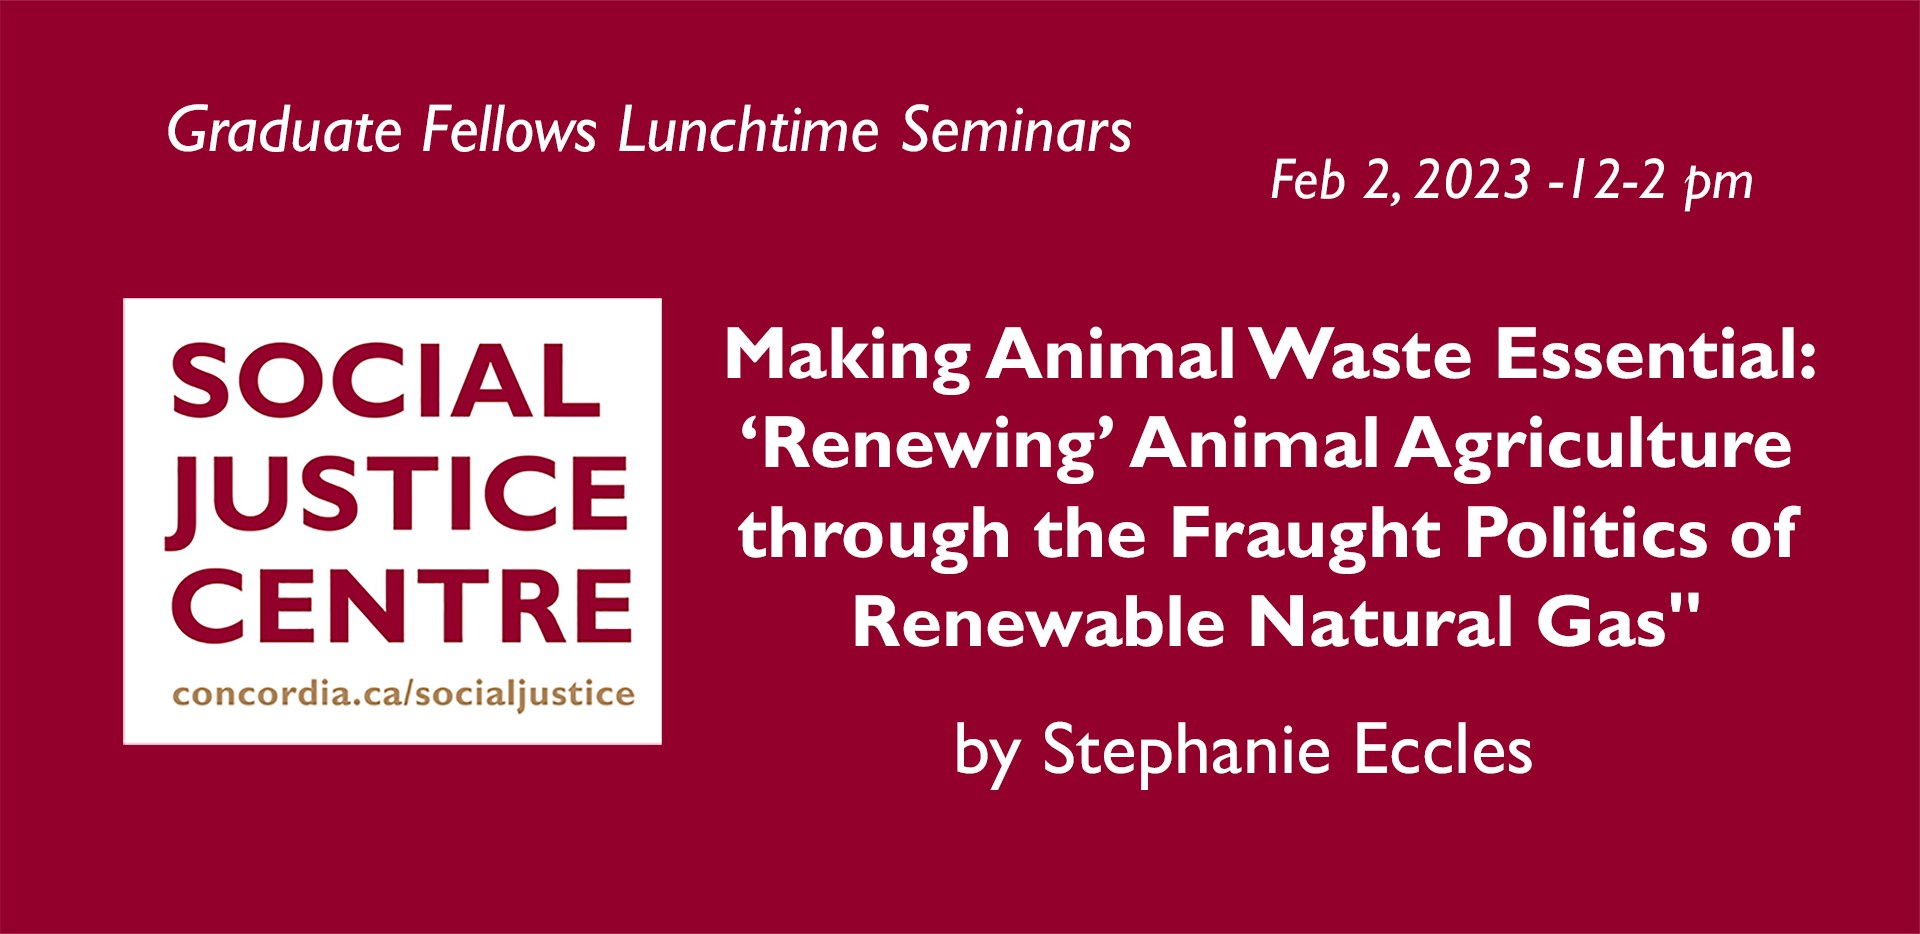 Stephanie Eccles Animal Waste and the Fraught Politics of Renewable Natural Gas 